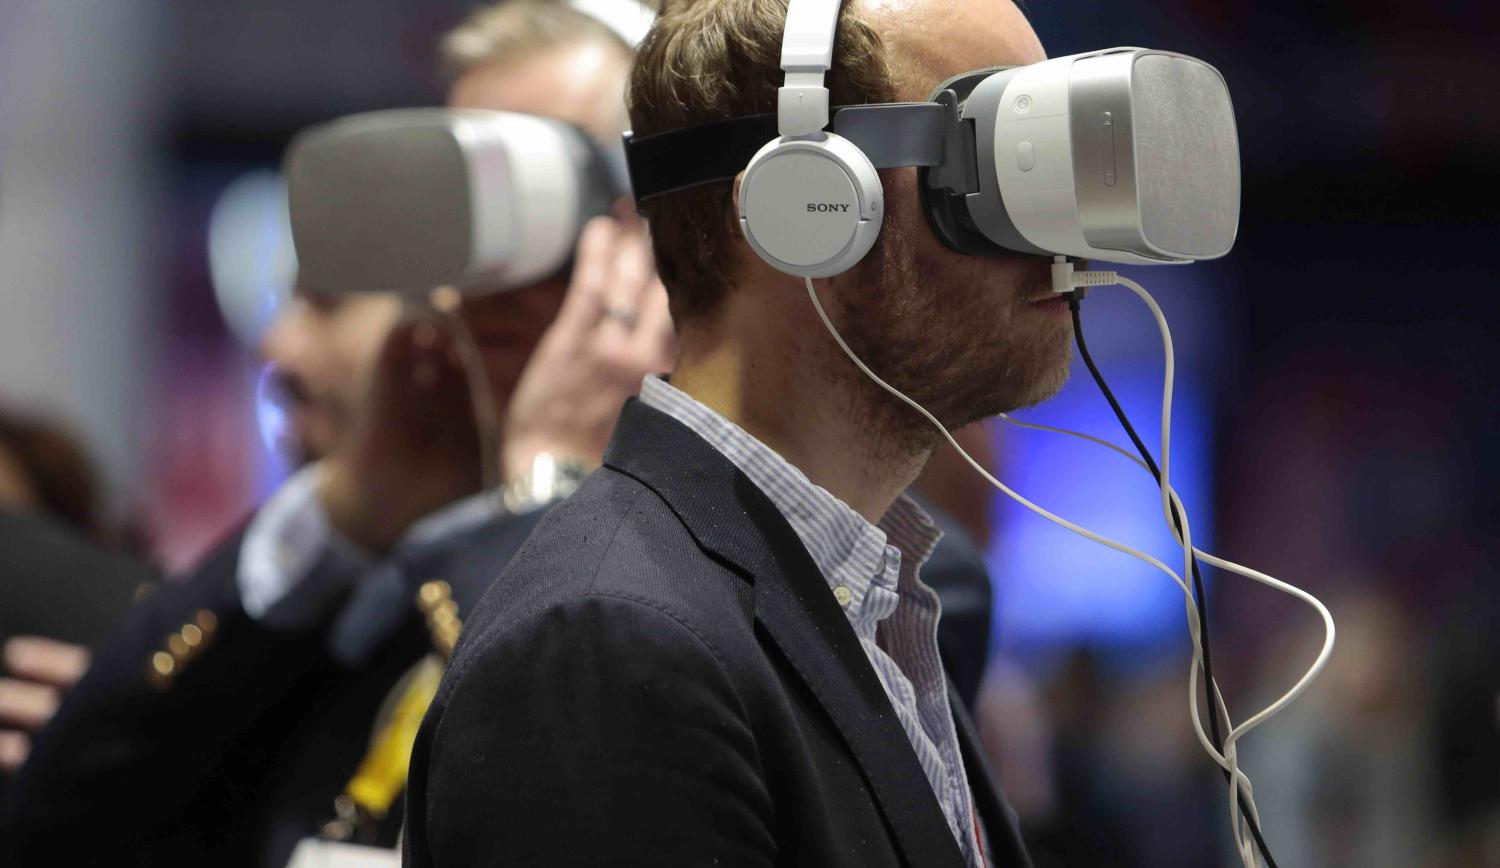 Virtual 5G technology on display at the Mobile World Congress, Barcelona, in February (Photo: Miquel Benitez/Getty)